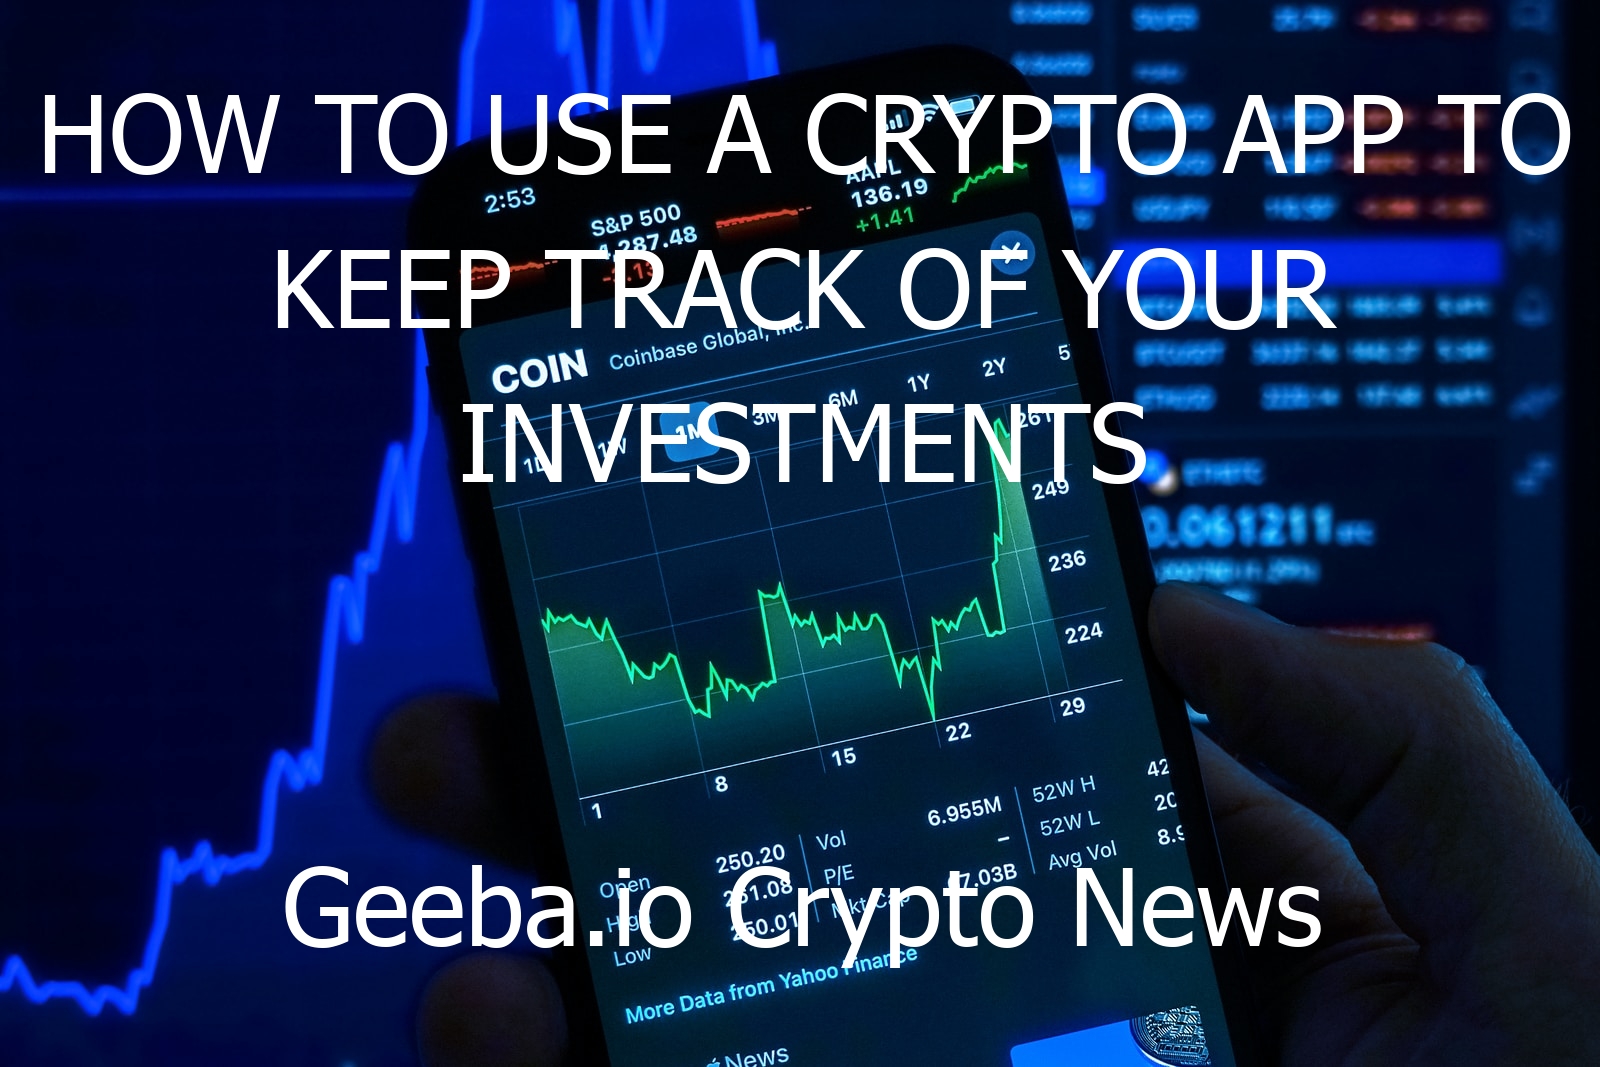 how to use a crypto app to keep track of your investments 2739